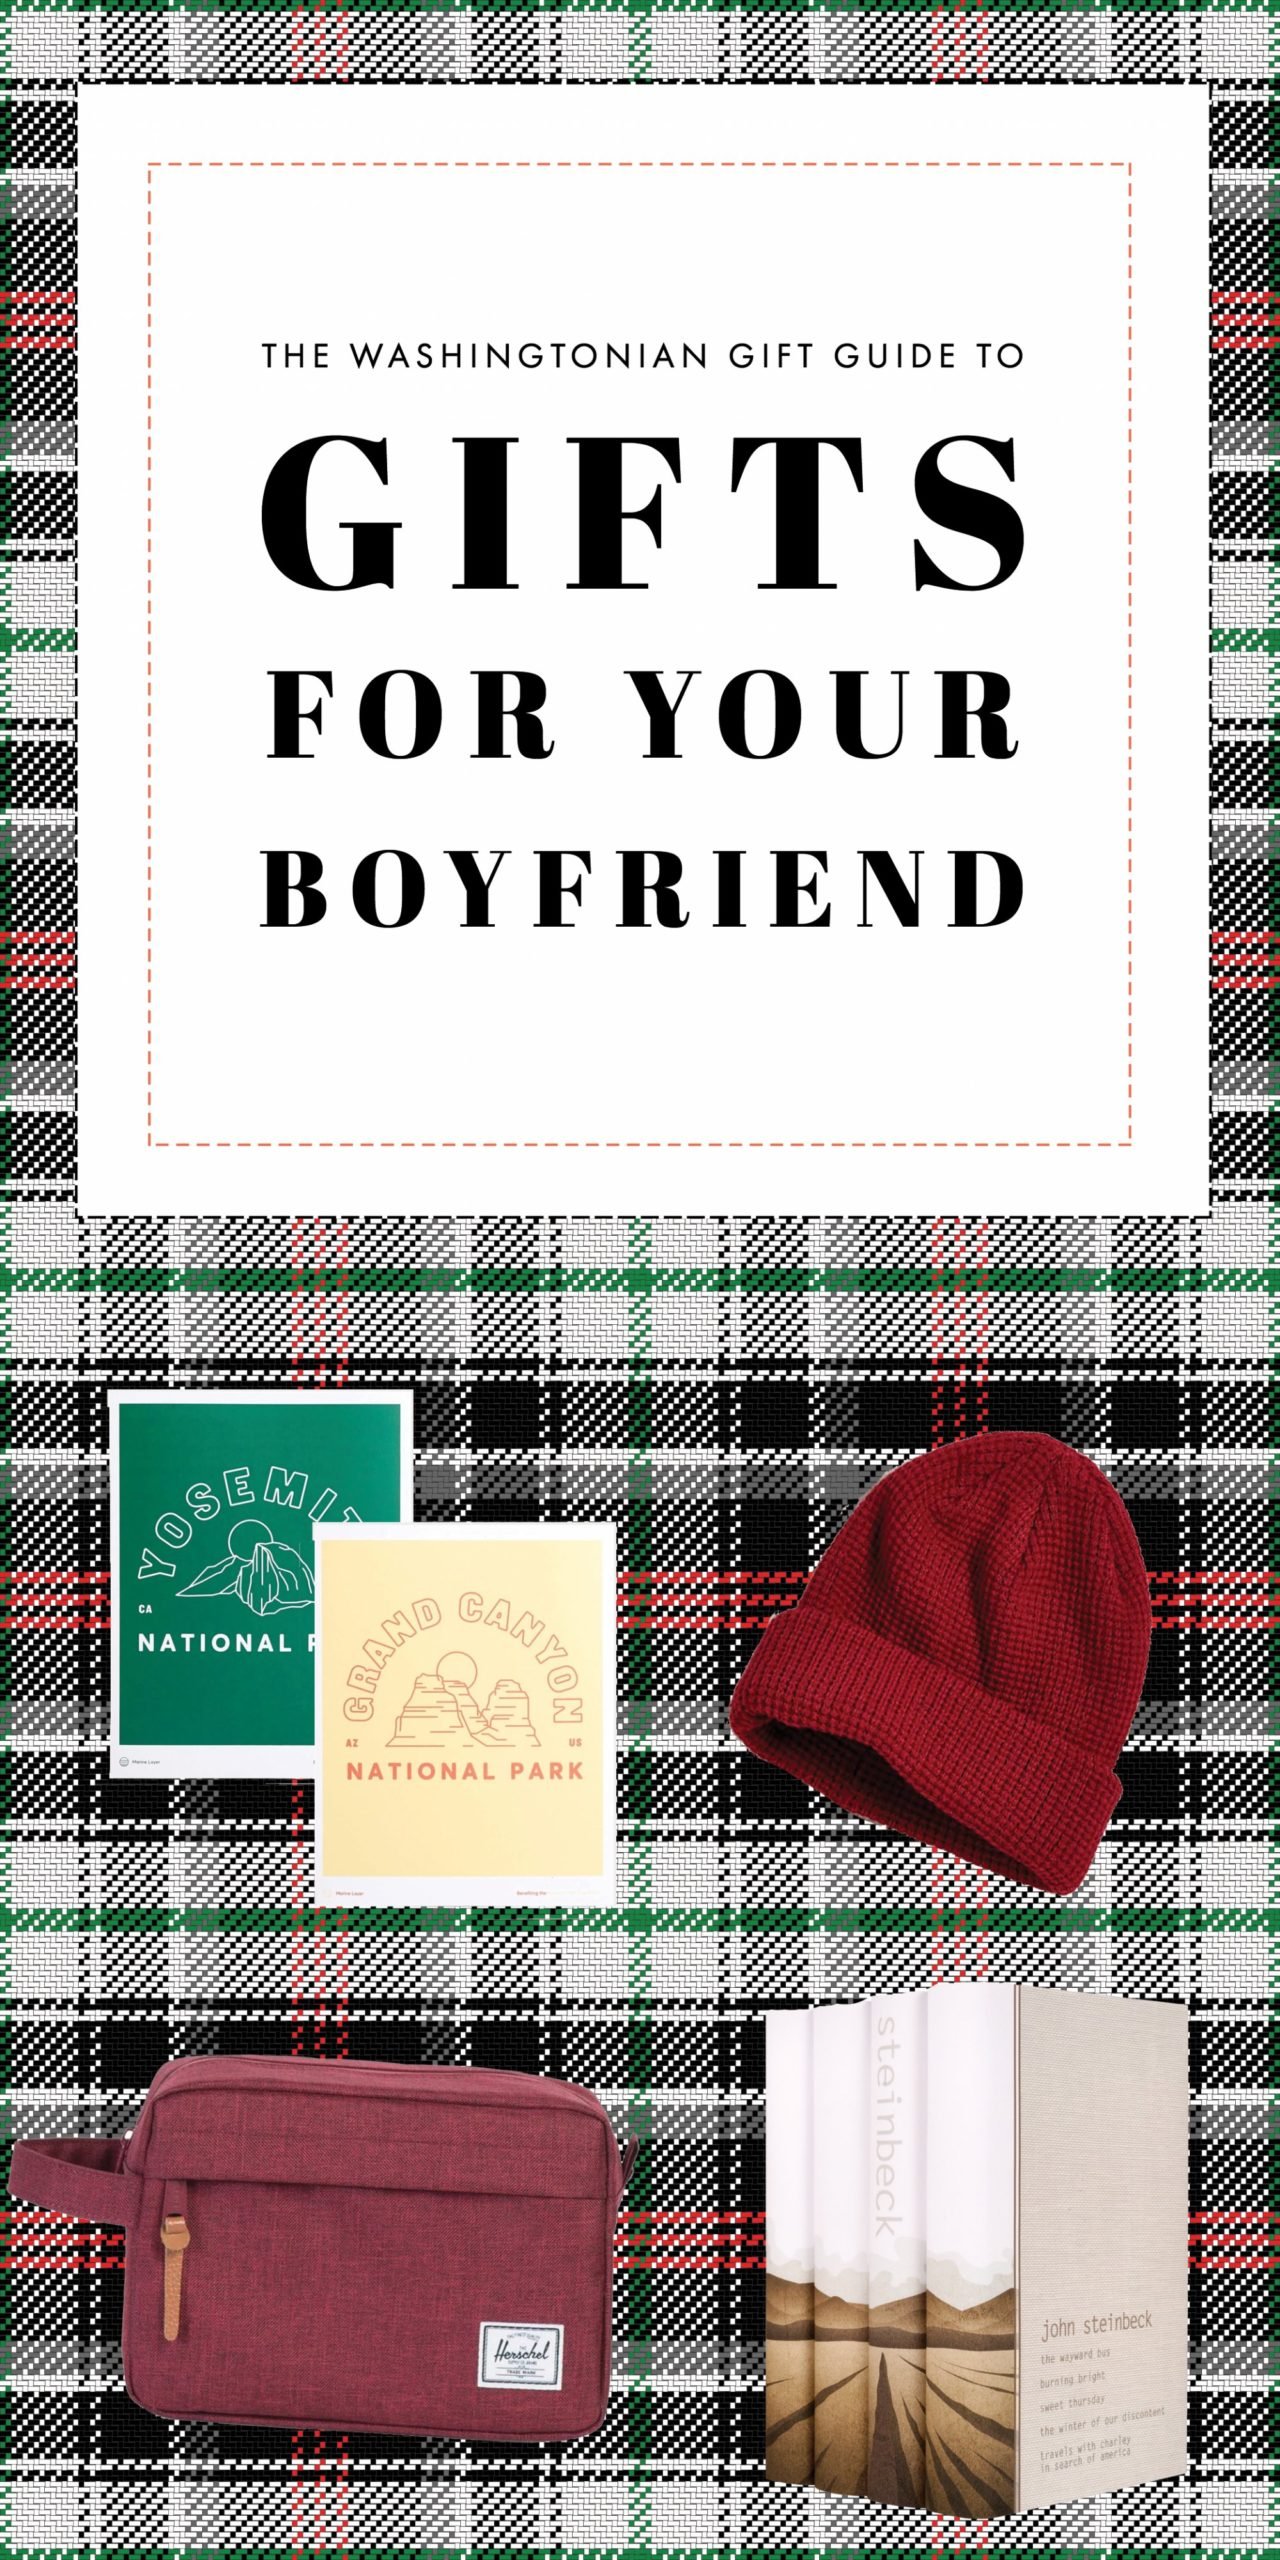 The Good Boyfriend Gift Guide: 16 Of the Best Gifts for ...